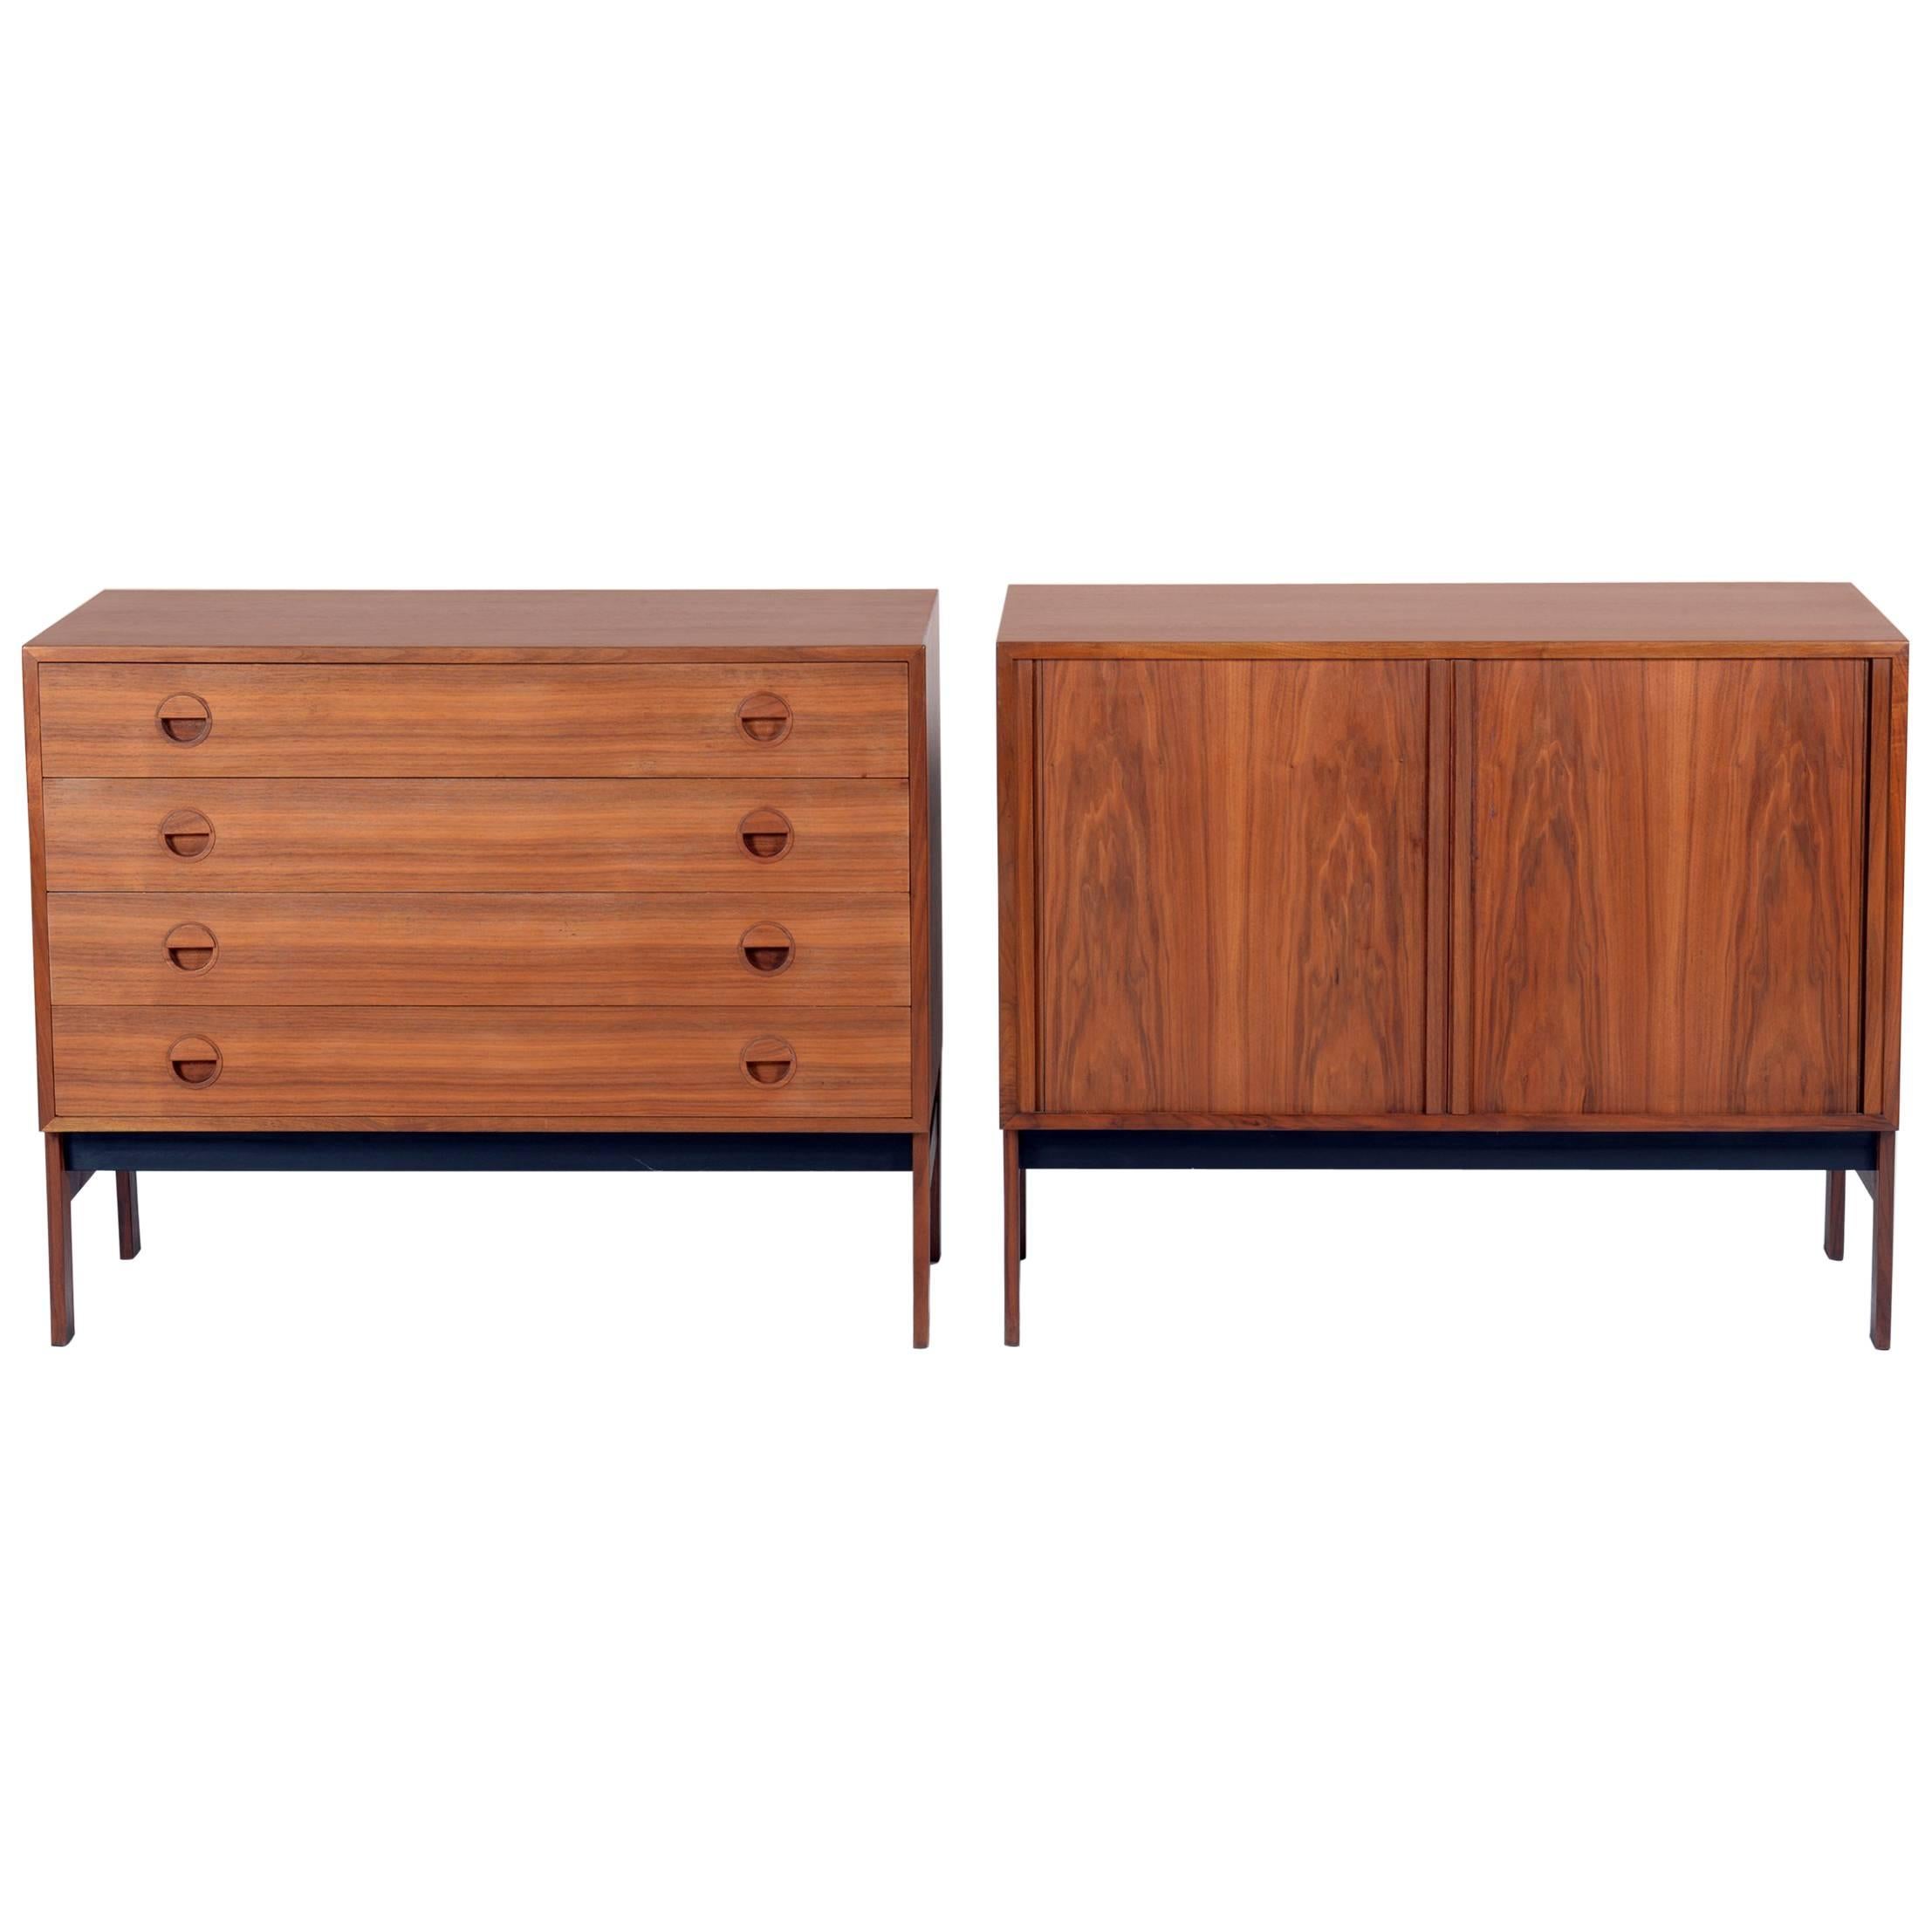 Pair of Danish Mid-20th Century Teak Wood Chest and Credenza, Signed